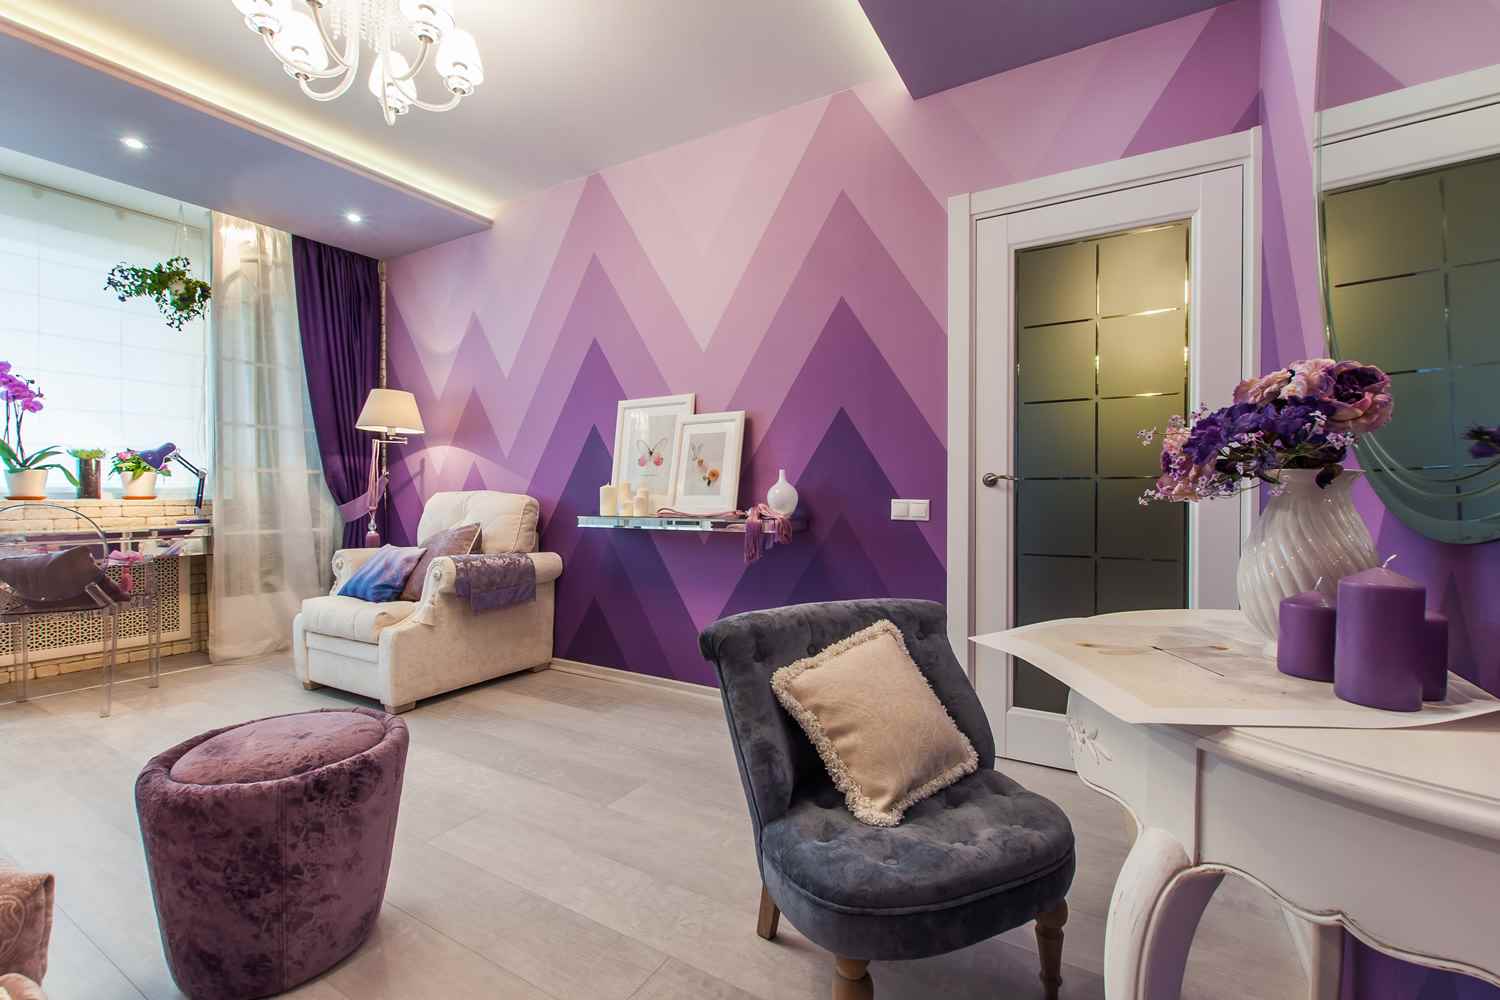 the idea of ​​using light lilac in the decor